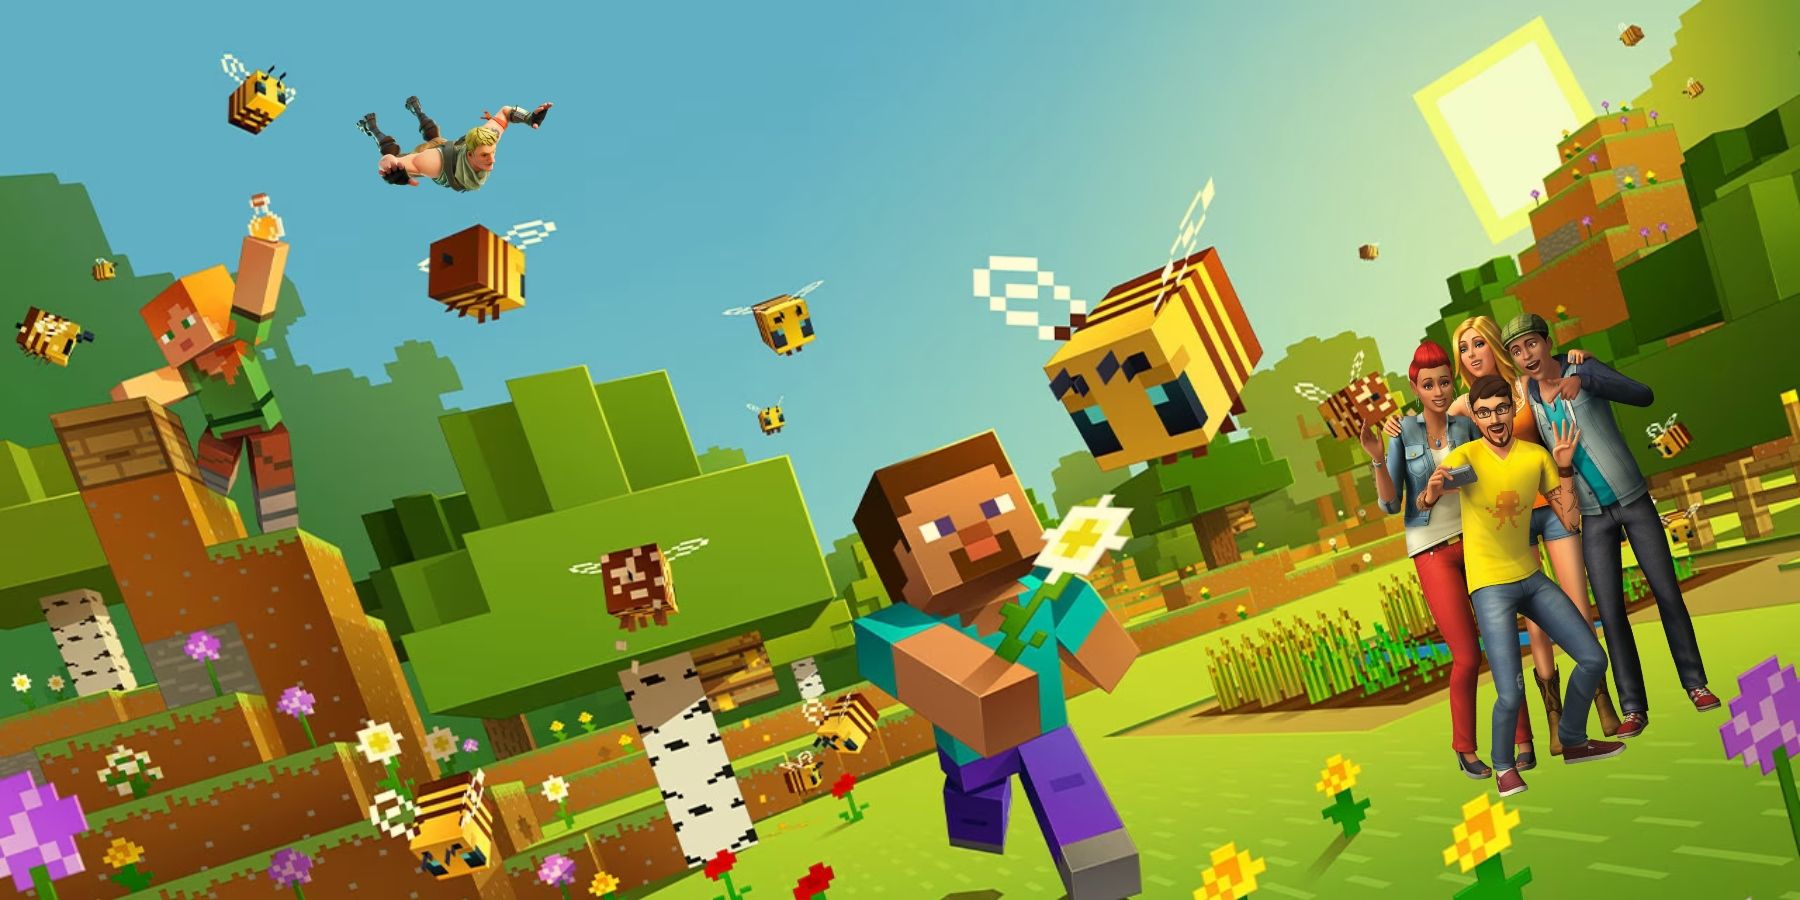 Best Mouse and Keyboard PS5 Games Thumbnail, jonesy from fortnite falls from the skies of minecraft, while four characters from The Sims take a selfie next to Minecraft Steve